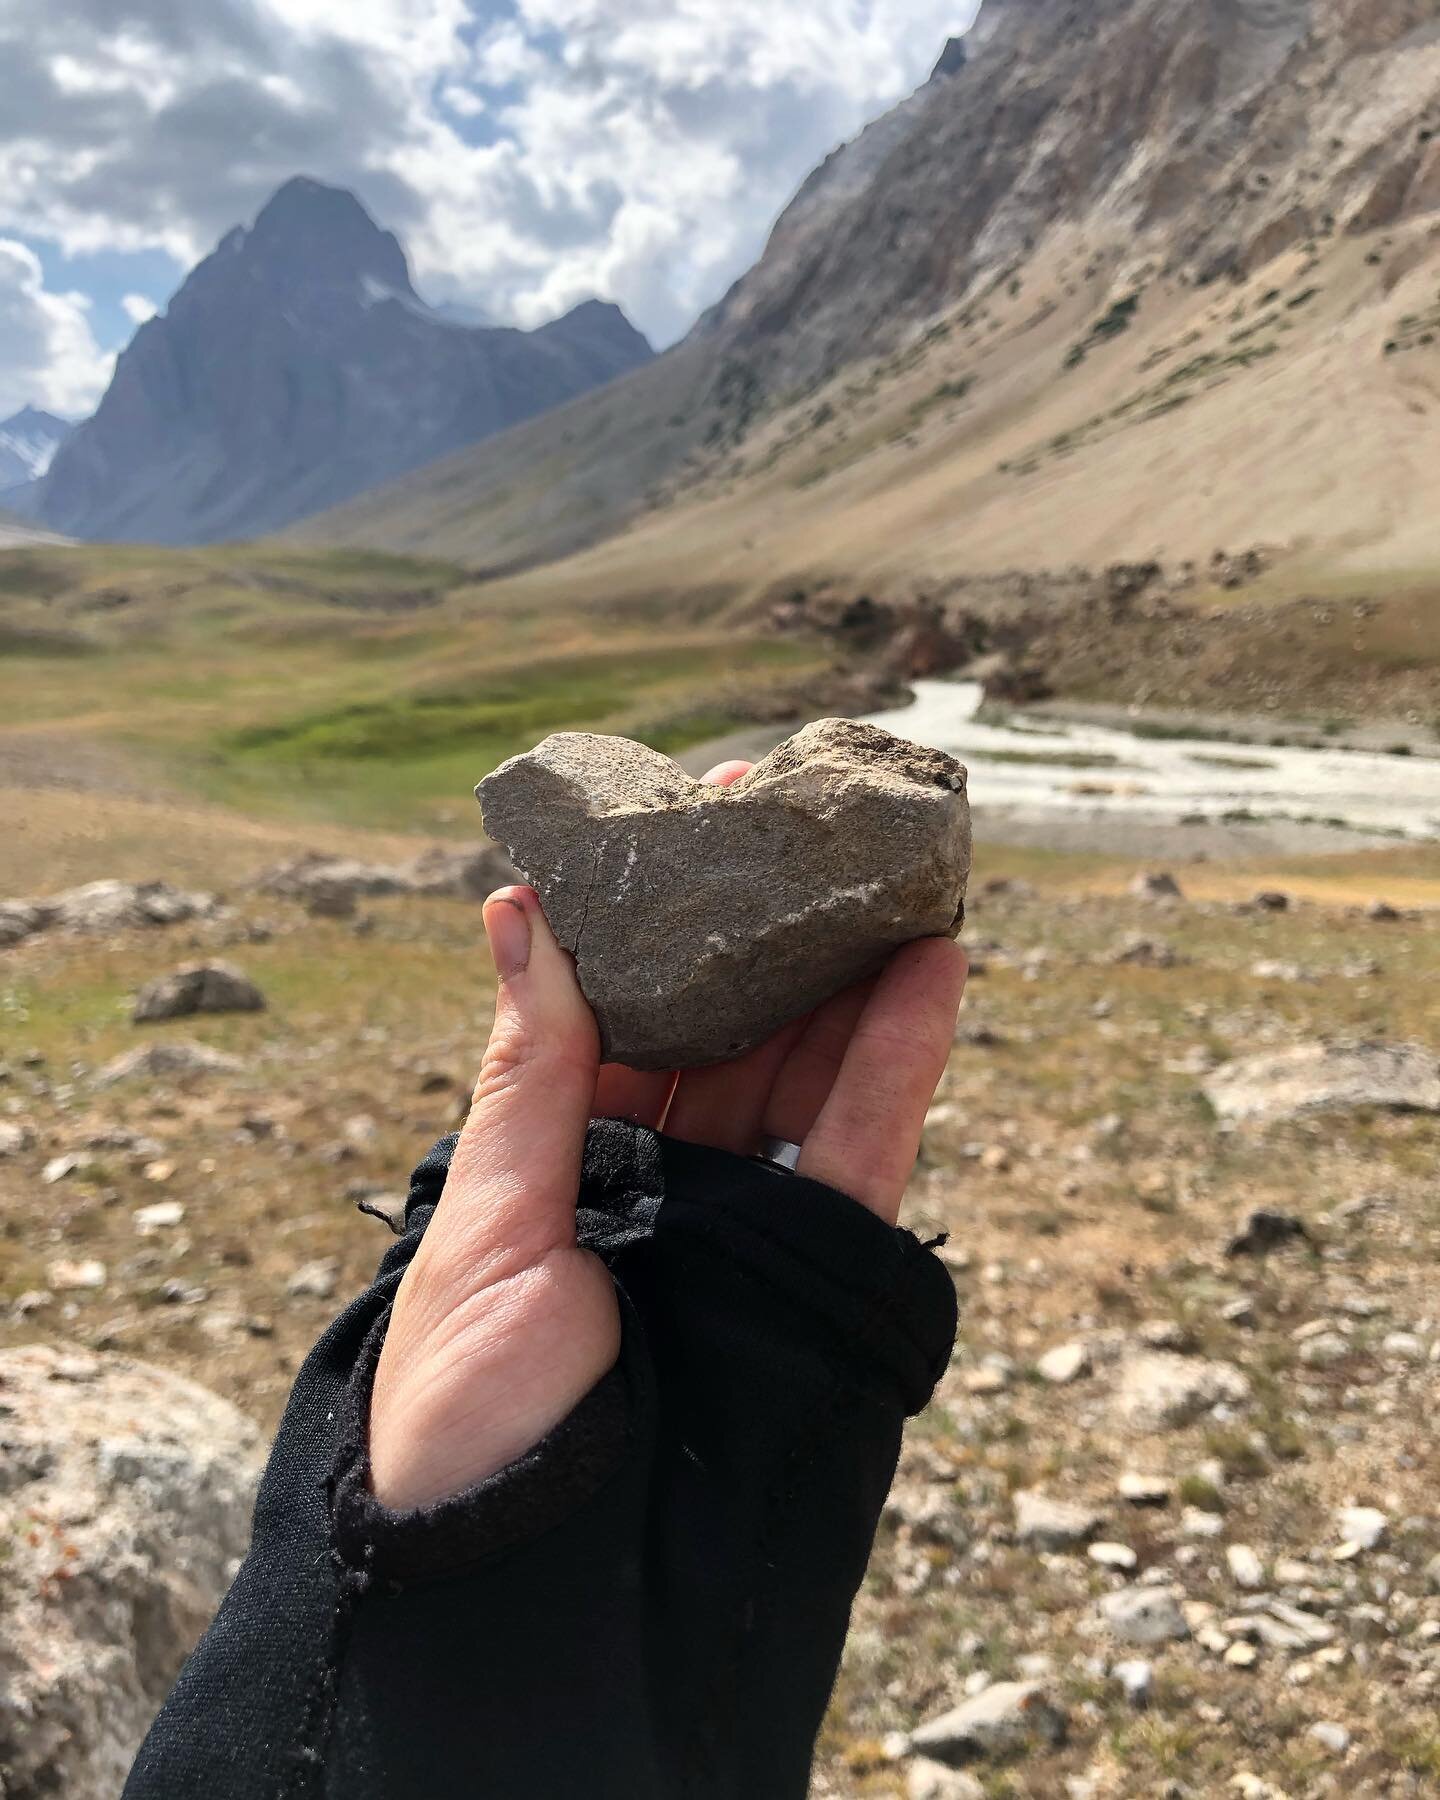 This time last year, somewhere in Kyrgyzstan. I had just seen my first snow leopards the month before in China, and I was leading my first field effort with National Geographic. Our team collected several scats in previously unsampled parts of southe